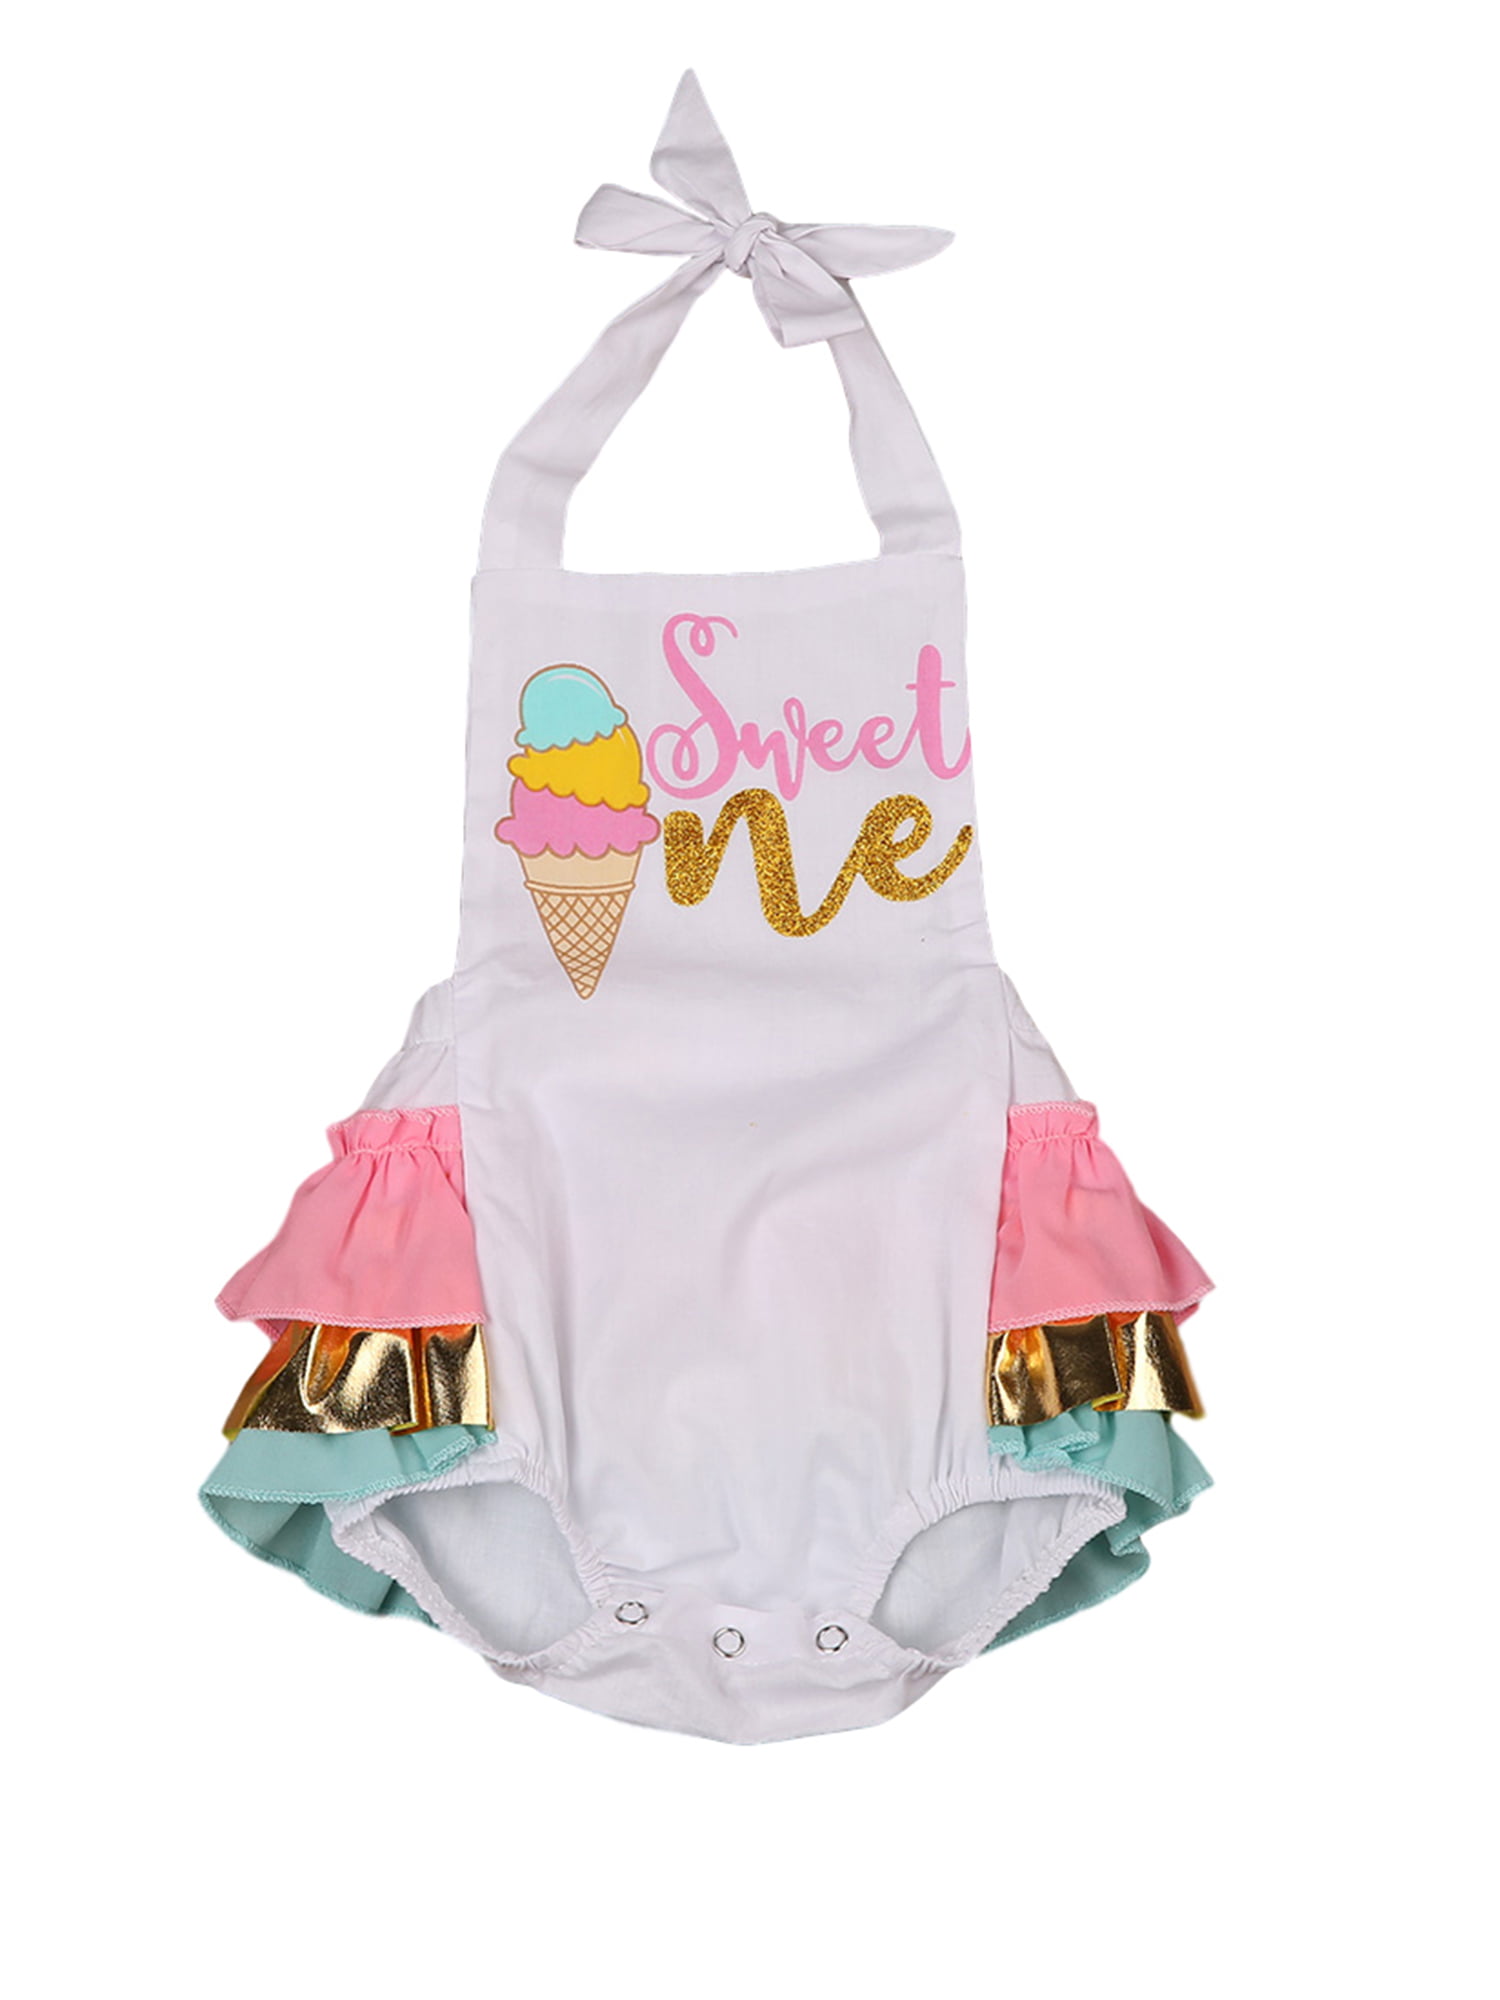 Details about   New Infant Girls One Piece Romper Happy Size 3 Months 